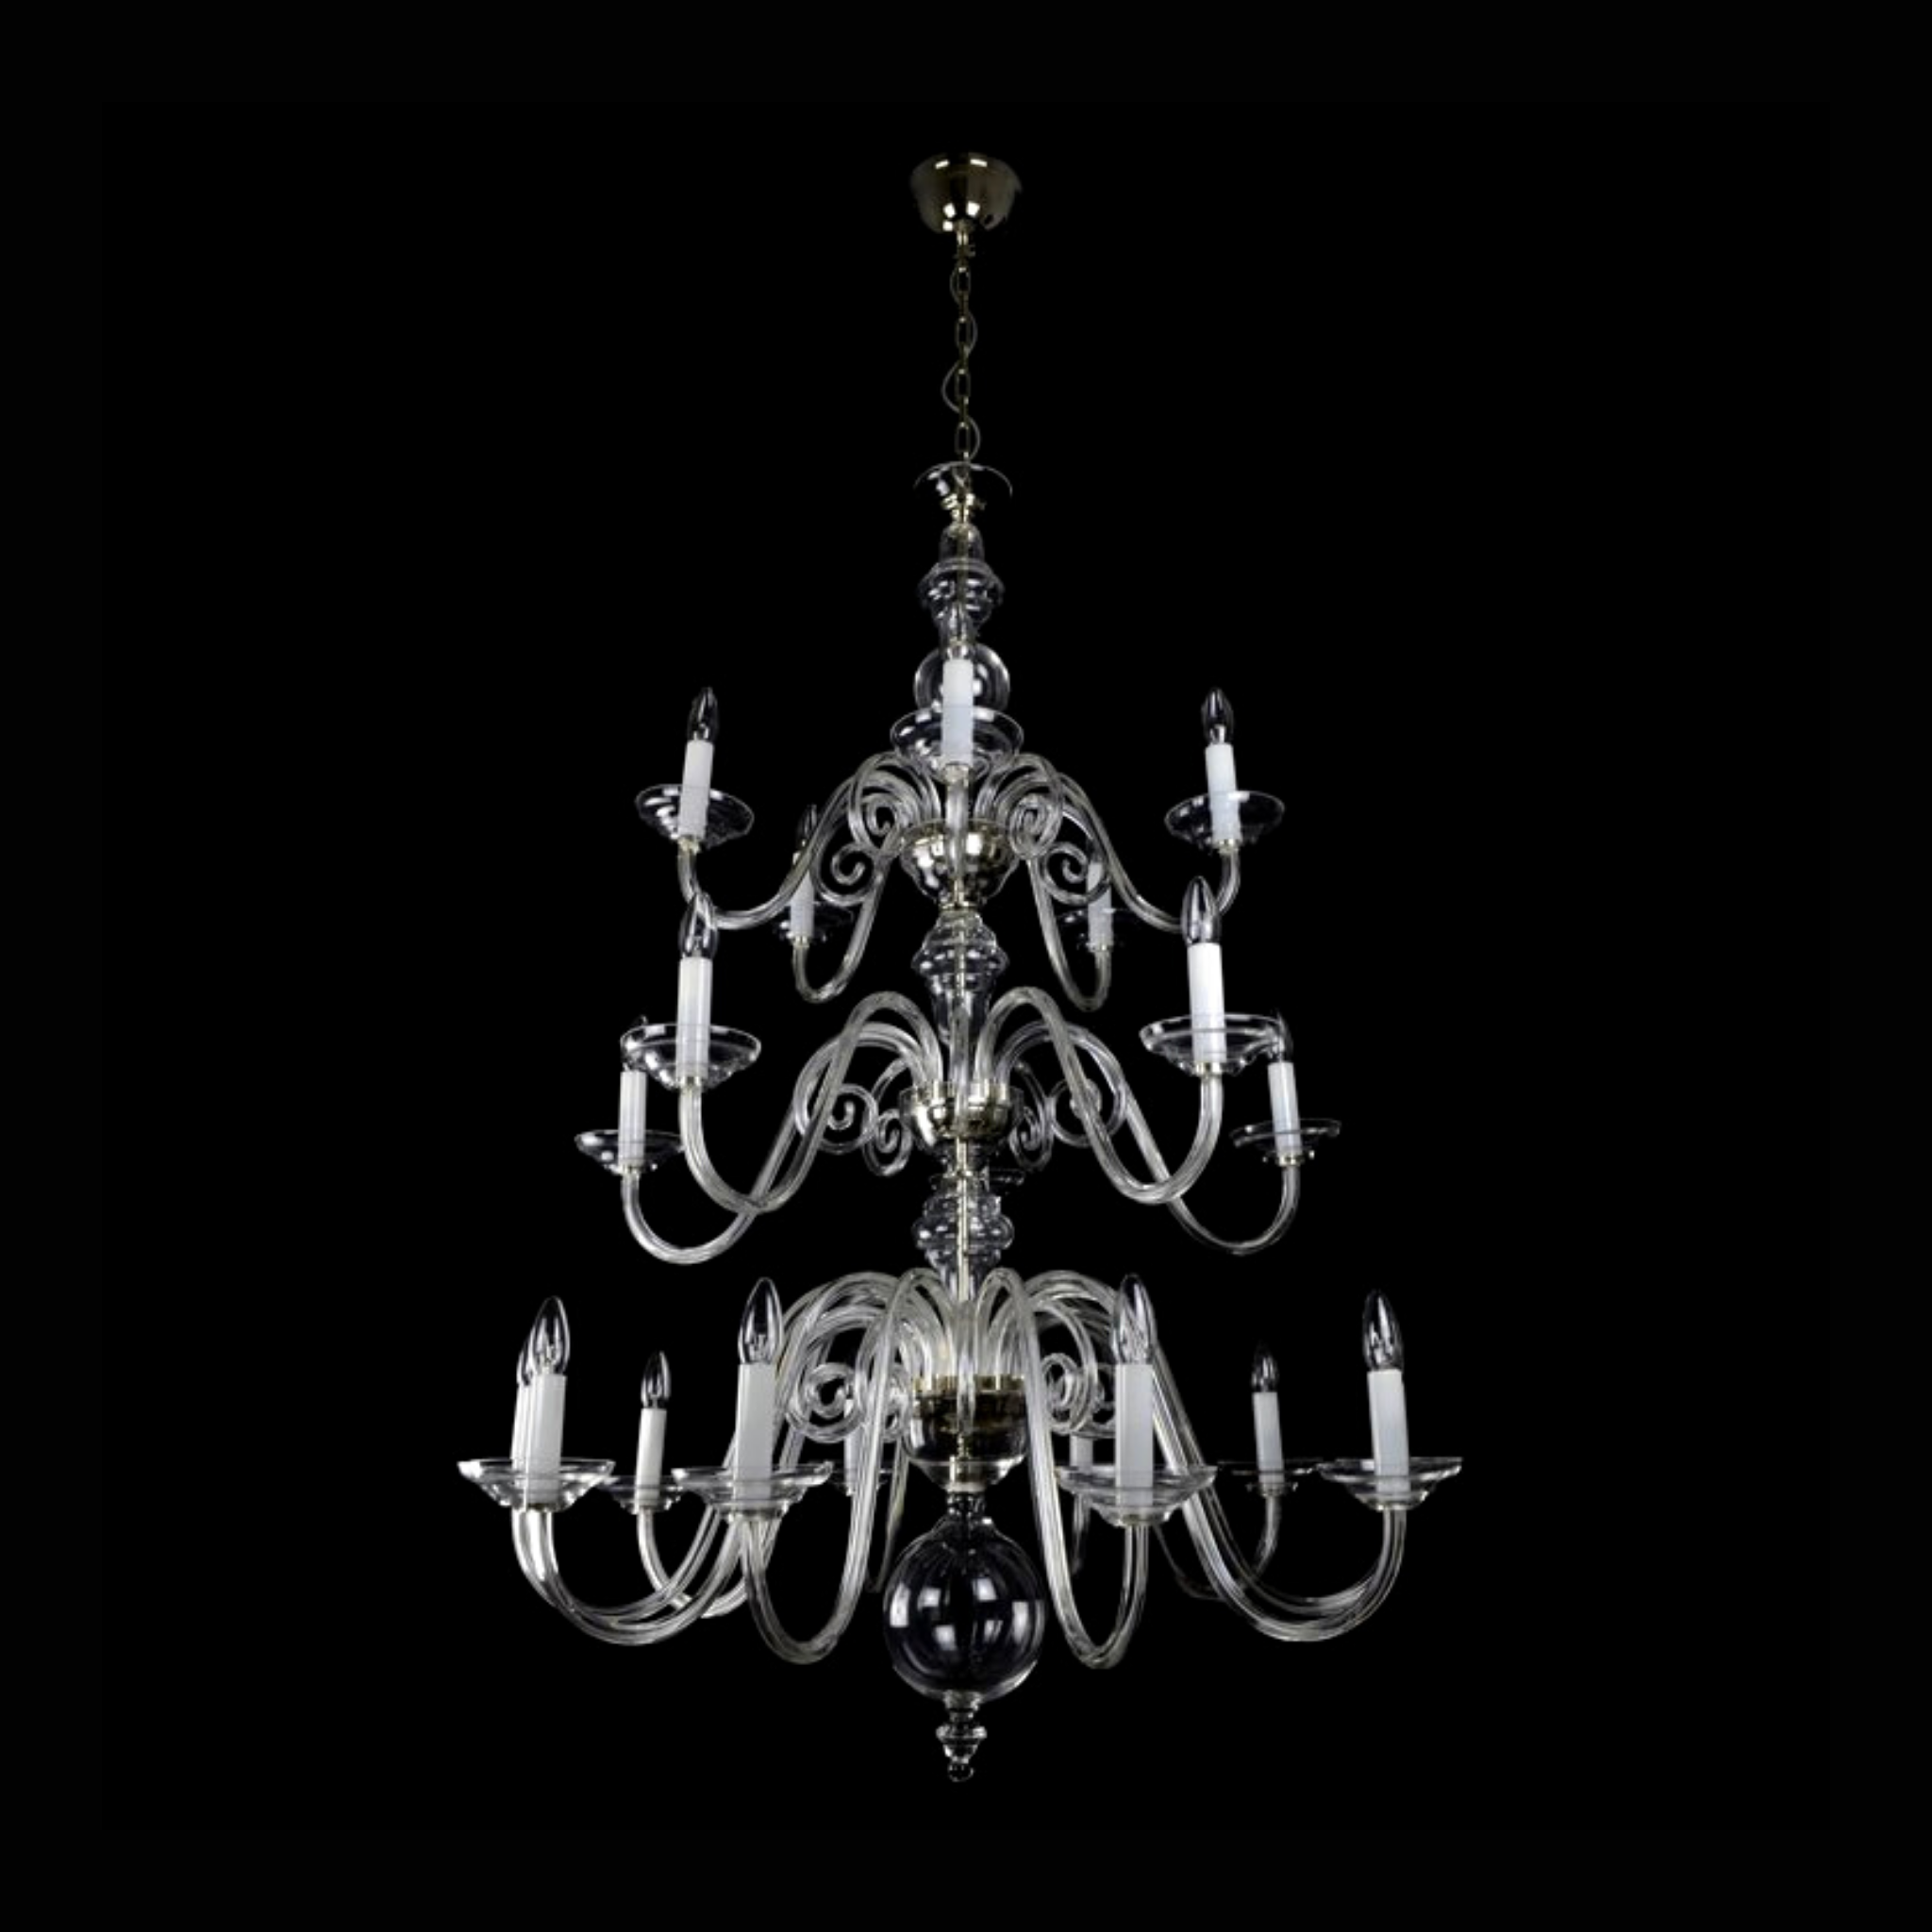 Clerius 20 Crystal Glass Chandelier - Wranovsky - Luxury Lighting Boutique